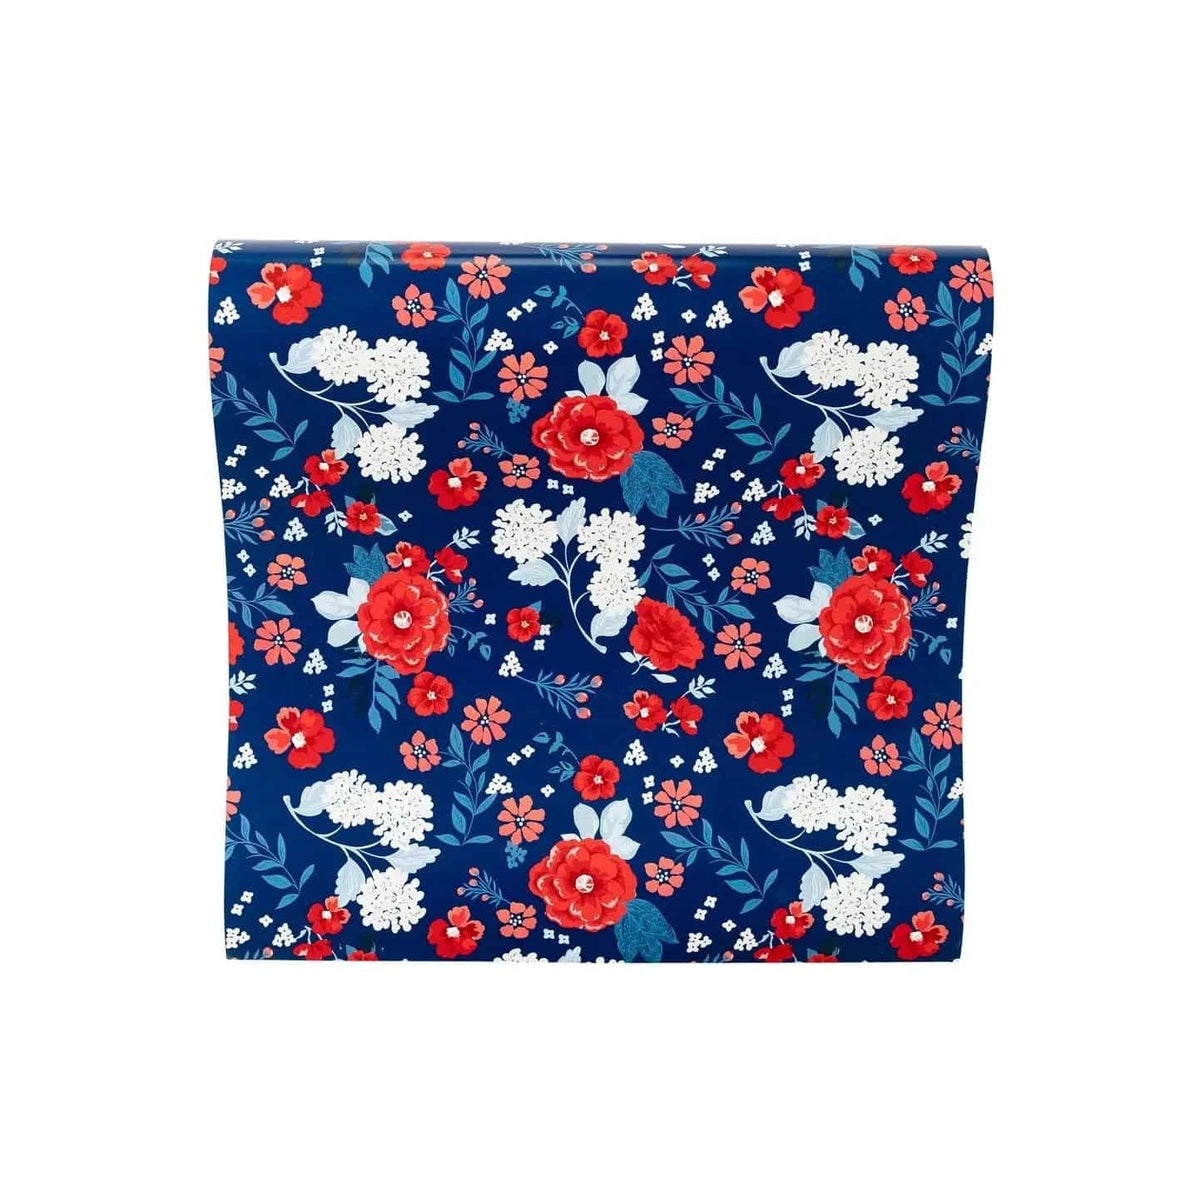 Blue Floral Paper Table Runner - The Preppy Bunny